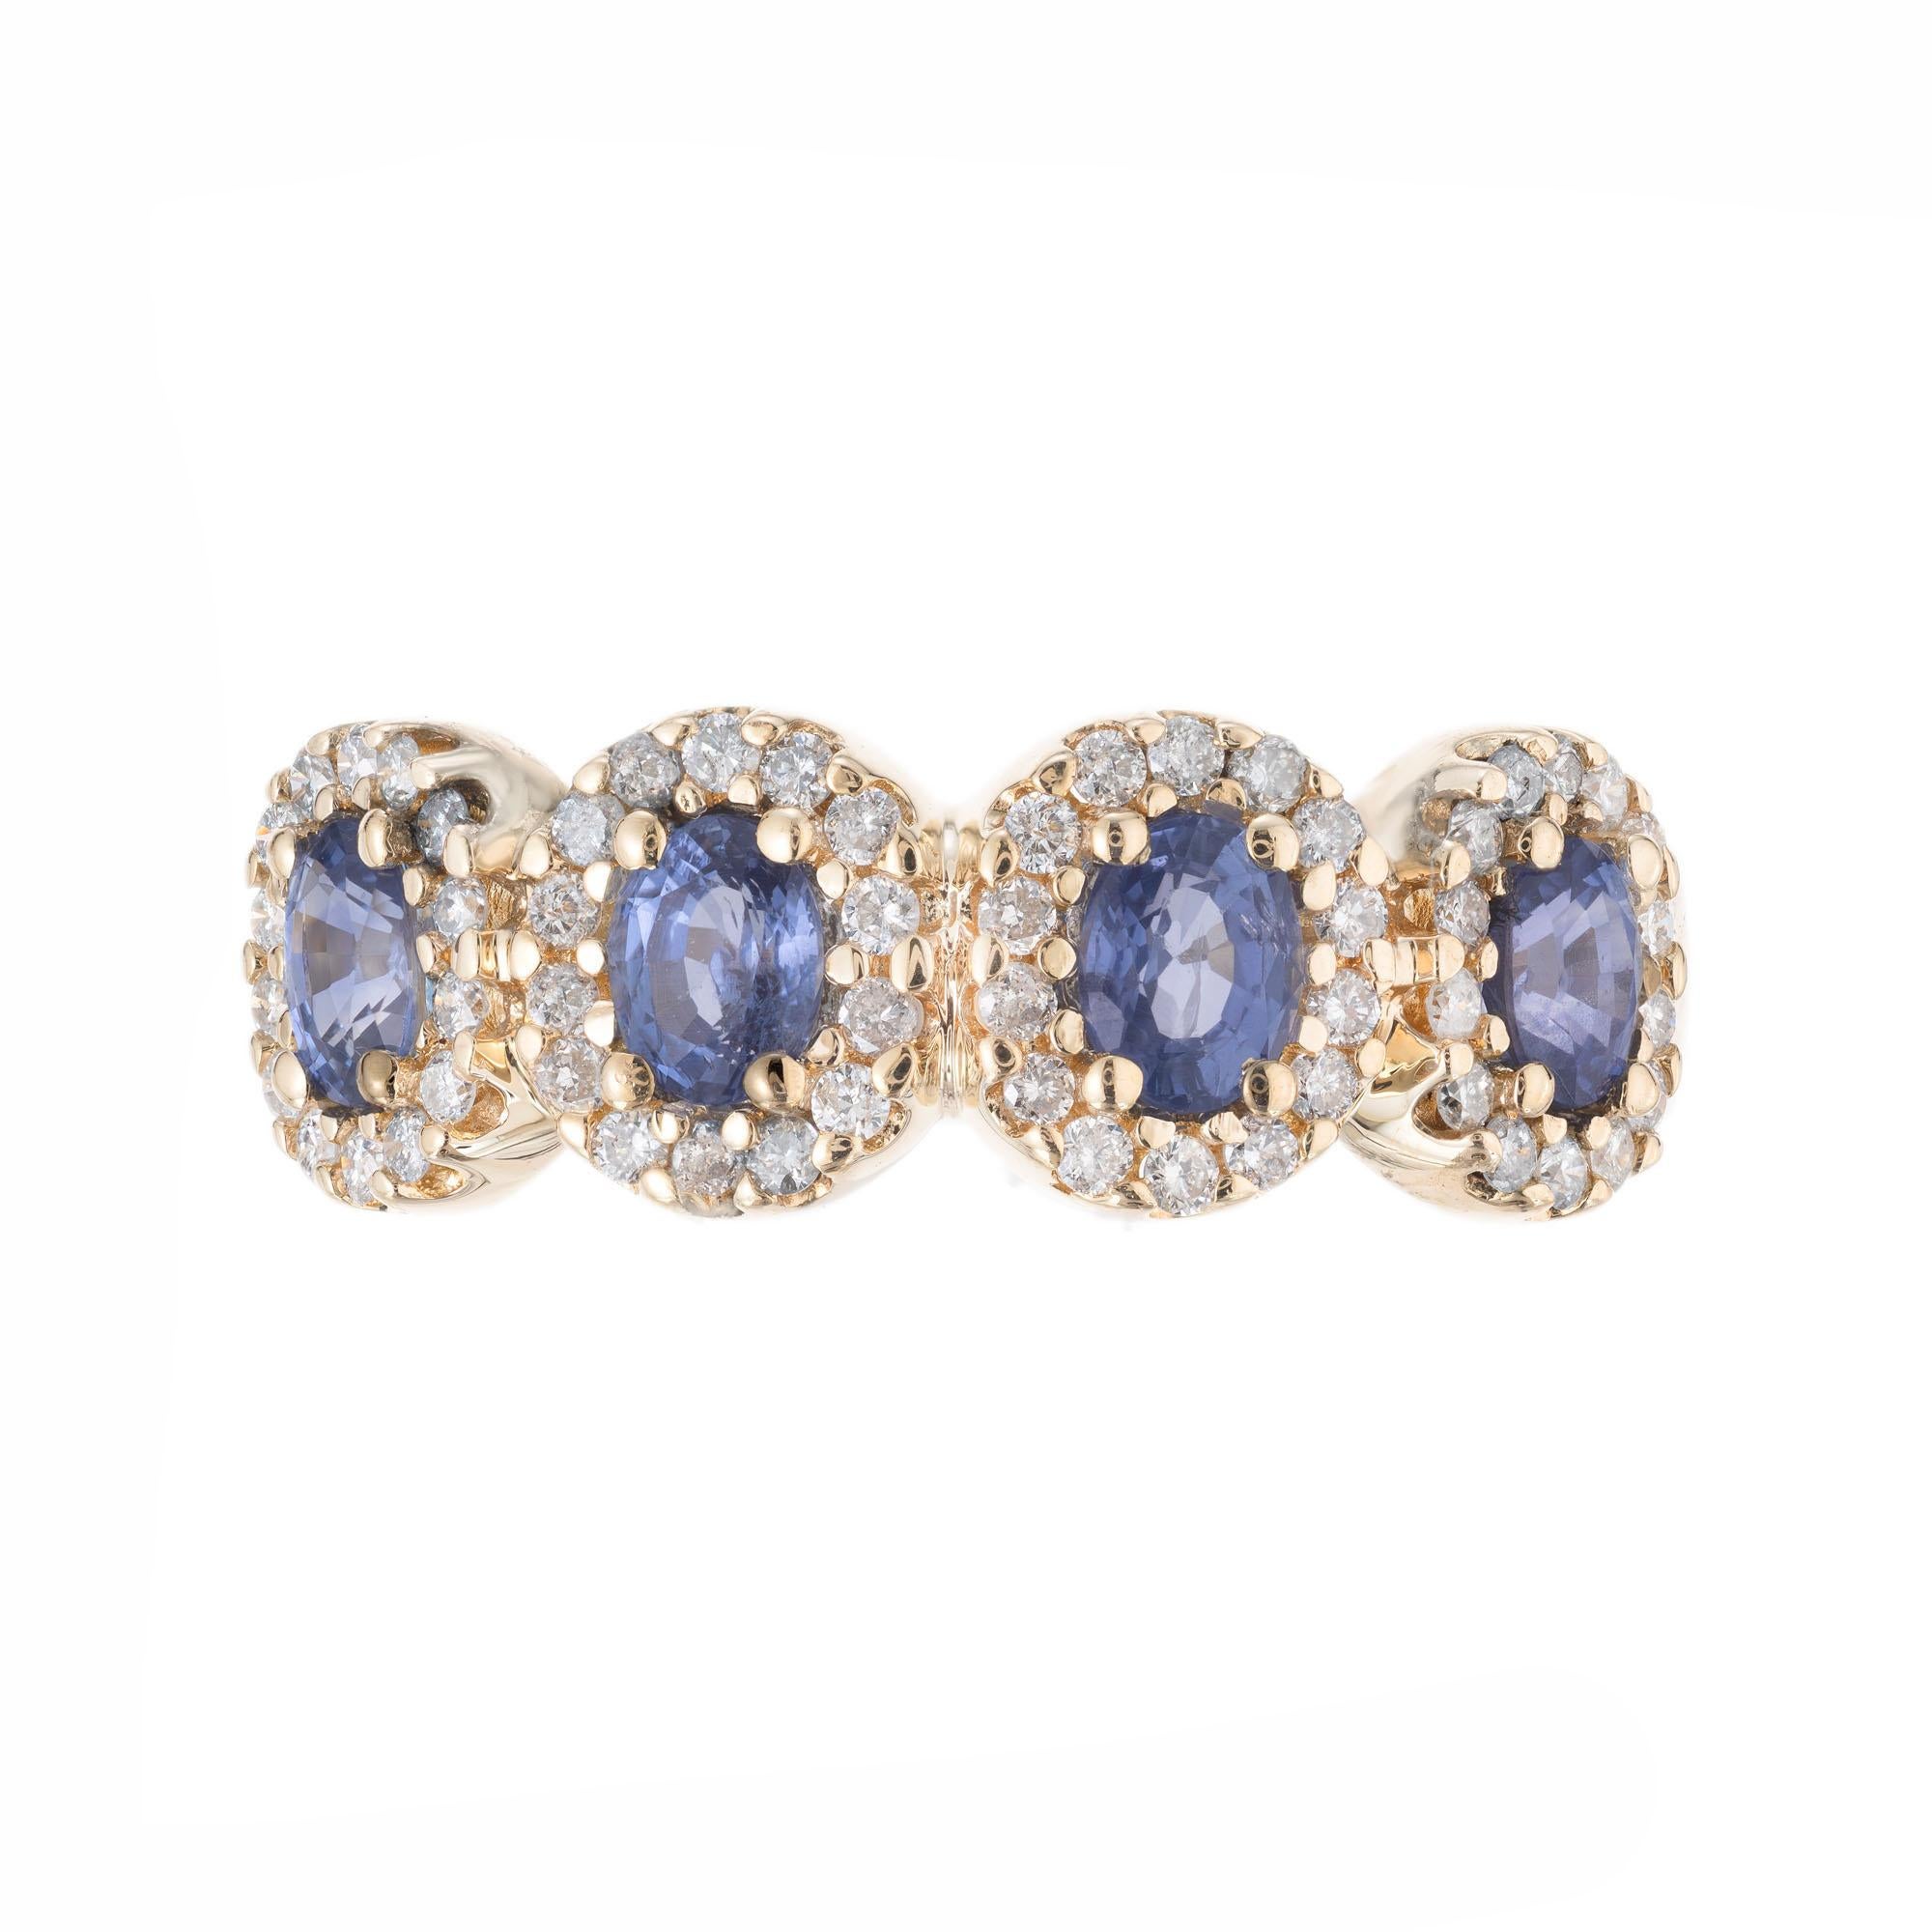 4 oval sapphire and diamond halo 14k yellow gold band ring.  Each oval sapphire is surrounded by a halo of round cut diamonds. 

Four 4 x 3mm oval Sapphire, approx. total weight 1.05cts
56 full cut diamonds, approx. total weight .44cts, I, SI
Size 7